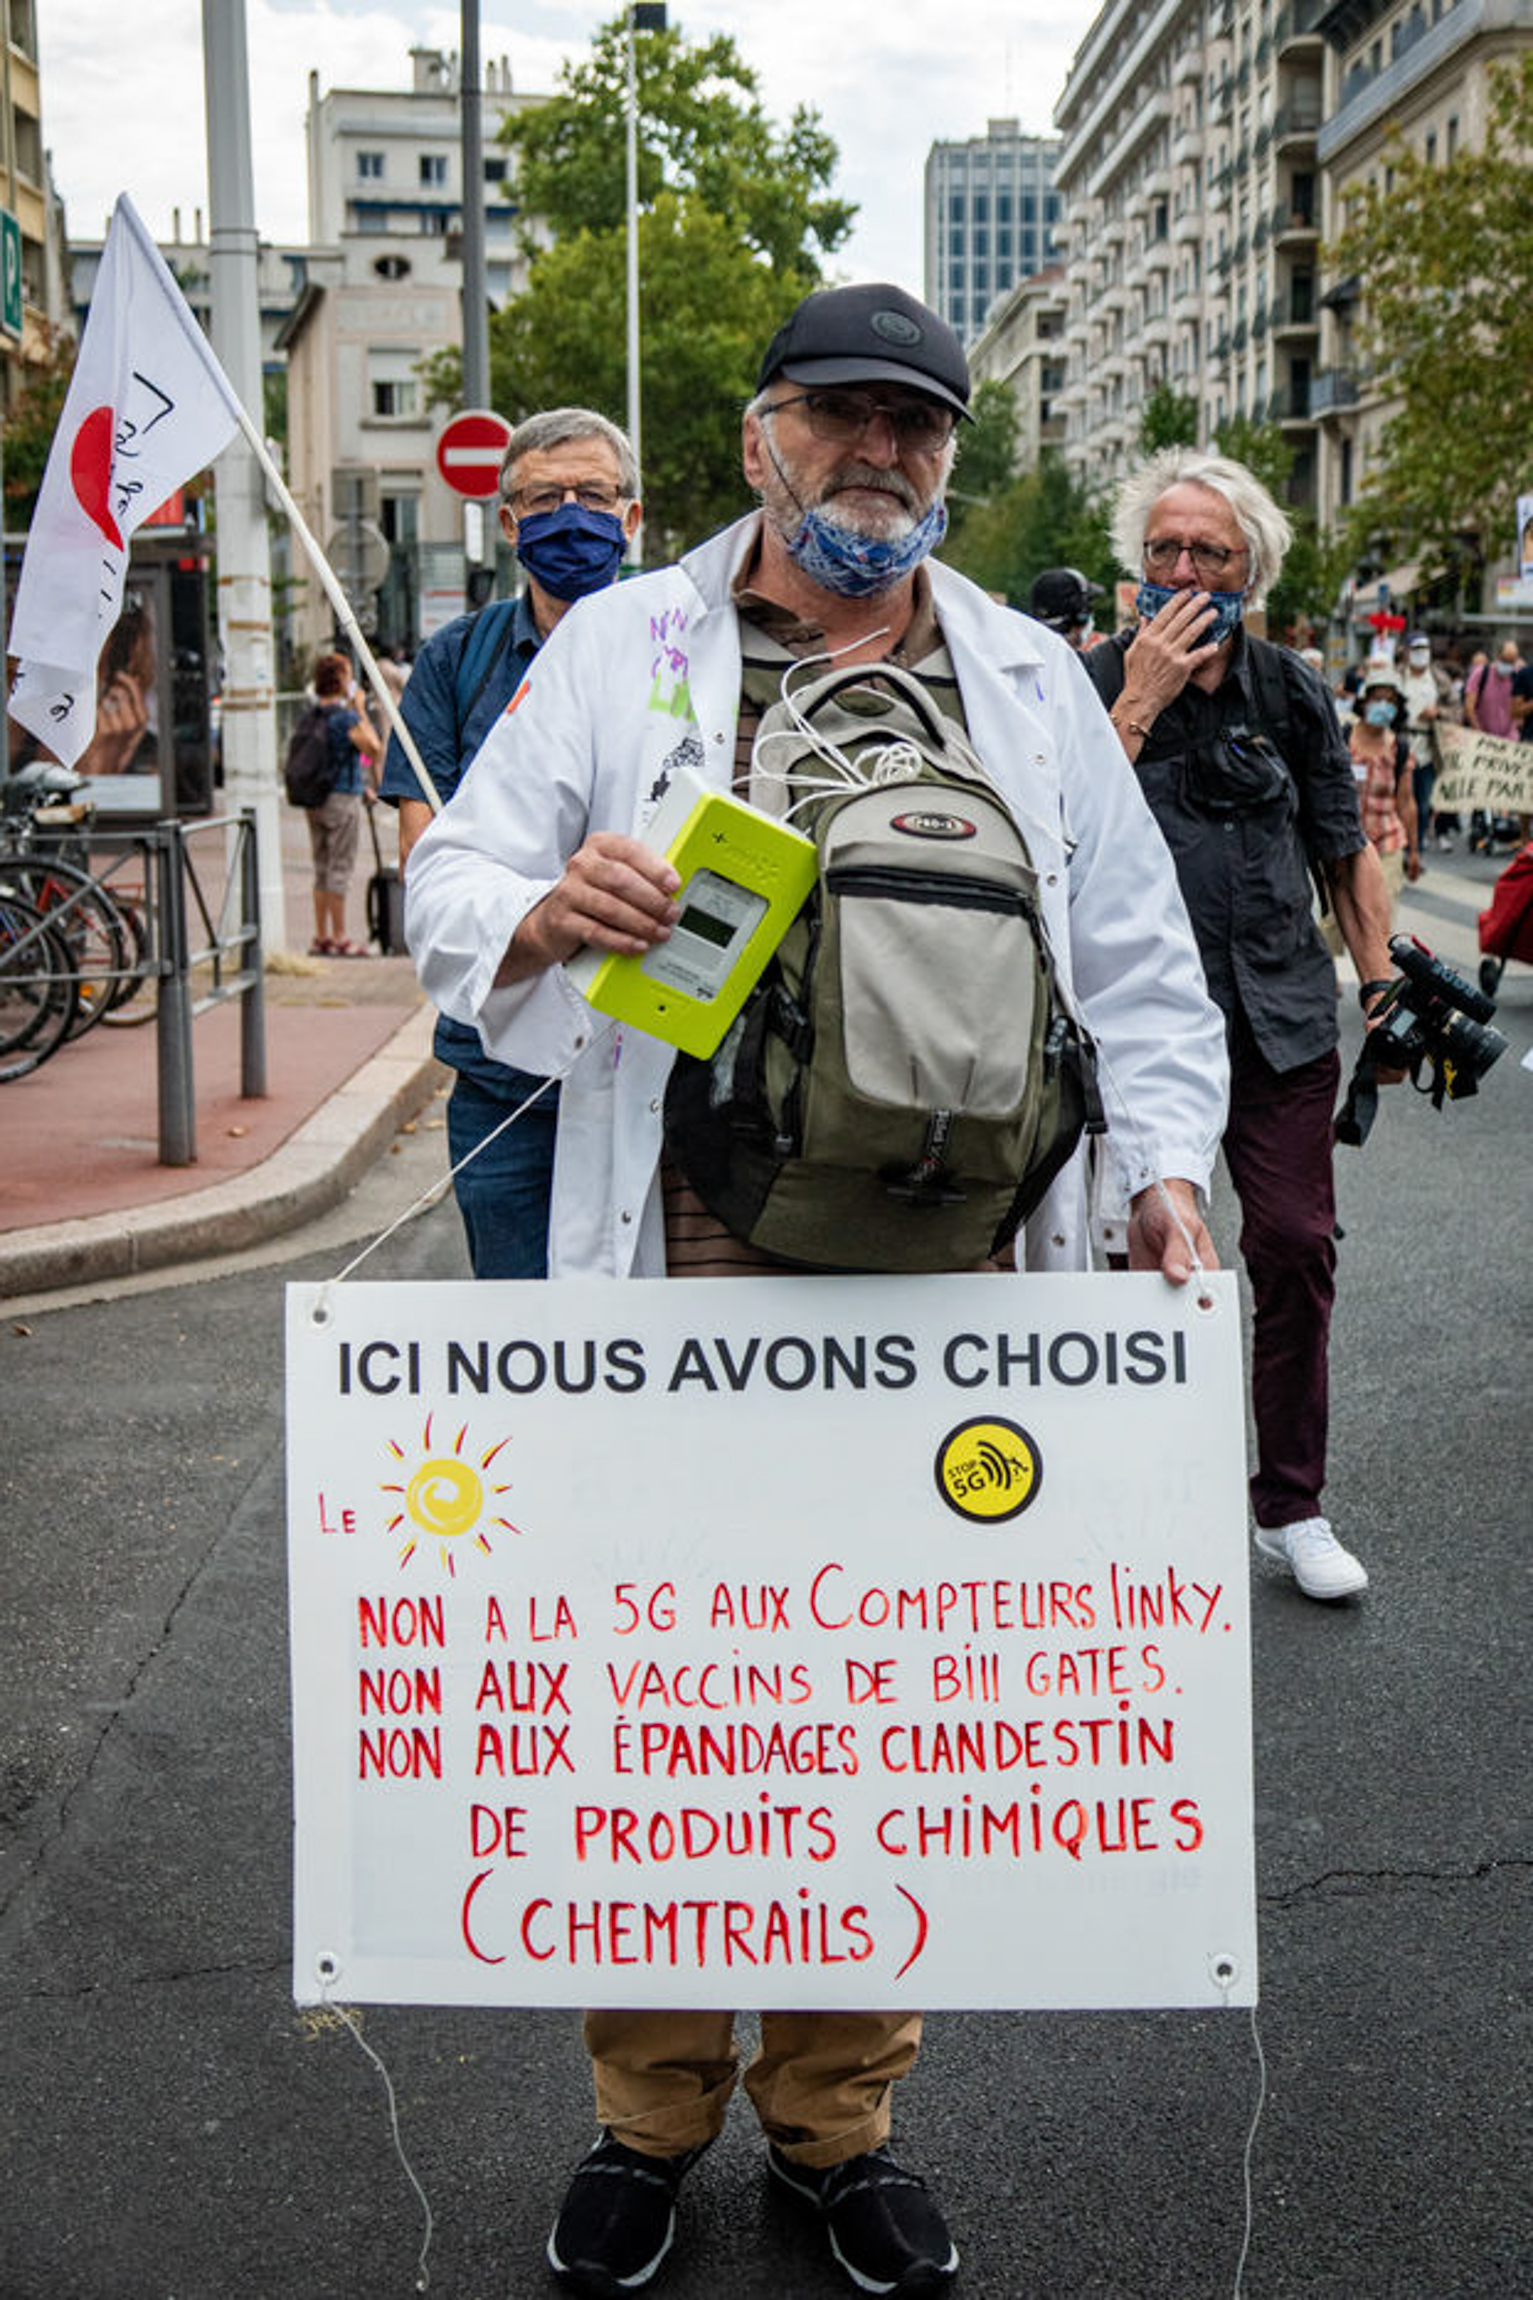 Demonstration against 5G in Lyon. The sign reads: "No to 5G and Linky [electricity] meters, no to Bill Gates's vaccines, no to chemtrails, [to] the covert spraying of chemicals". 19 September 2020 (Nicolas Liponne)